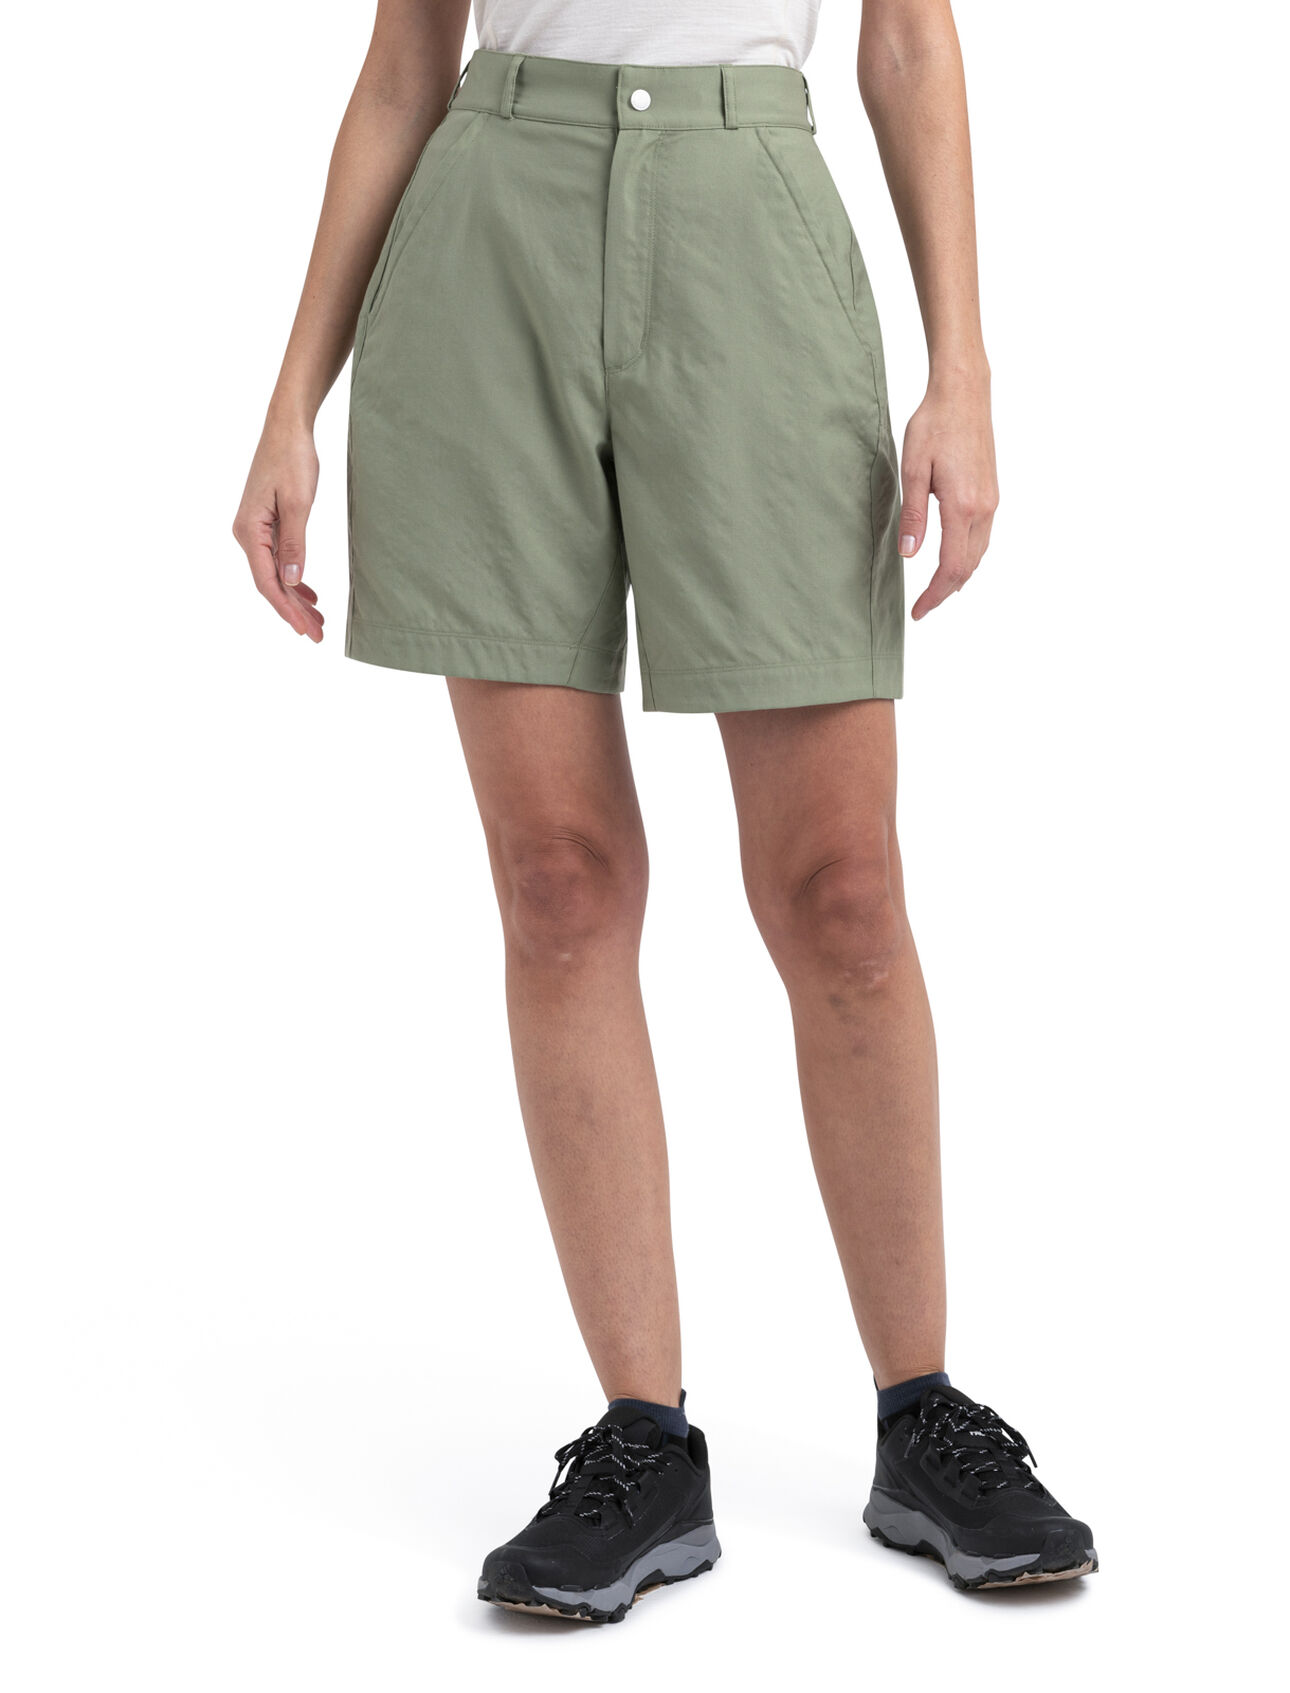 Womens Merino Hike Shorts A durable and dependable mountain short made from a unique blend of merino wool and organically grown cotton, the Hike Shorts are perfect for mountain adventures of all kinds.